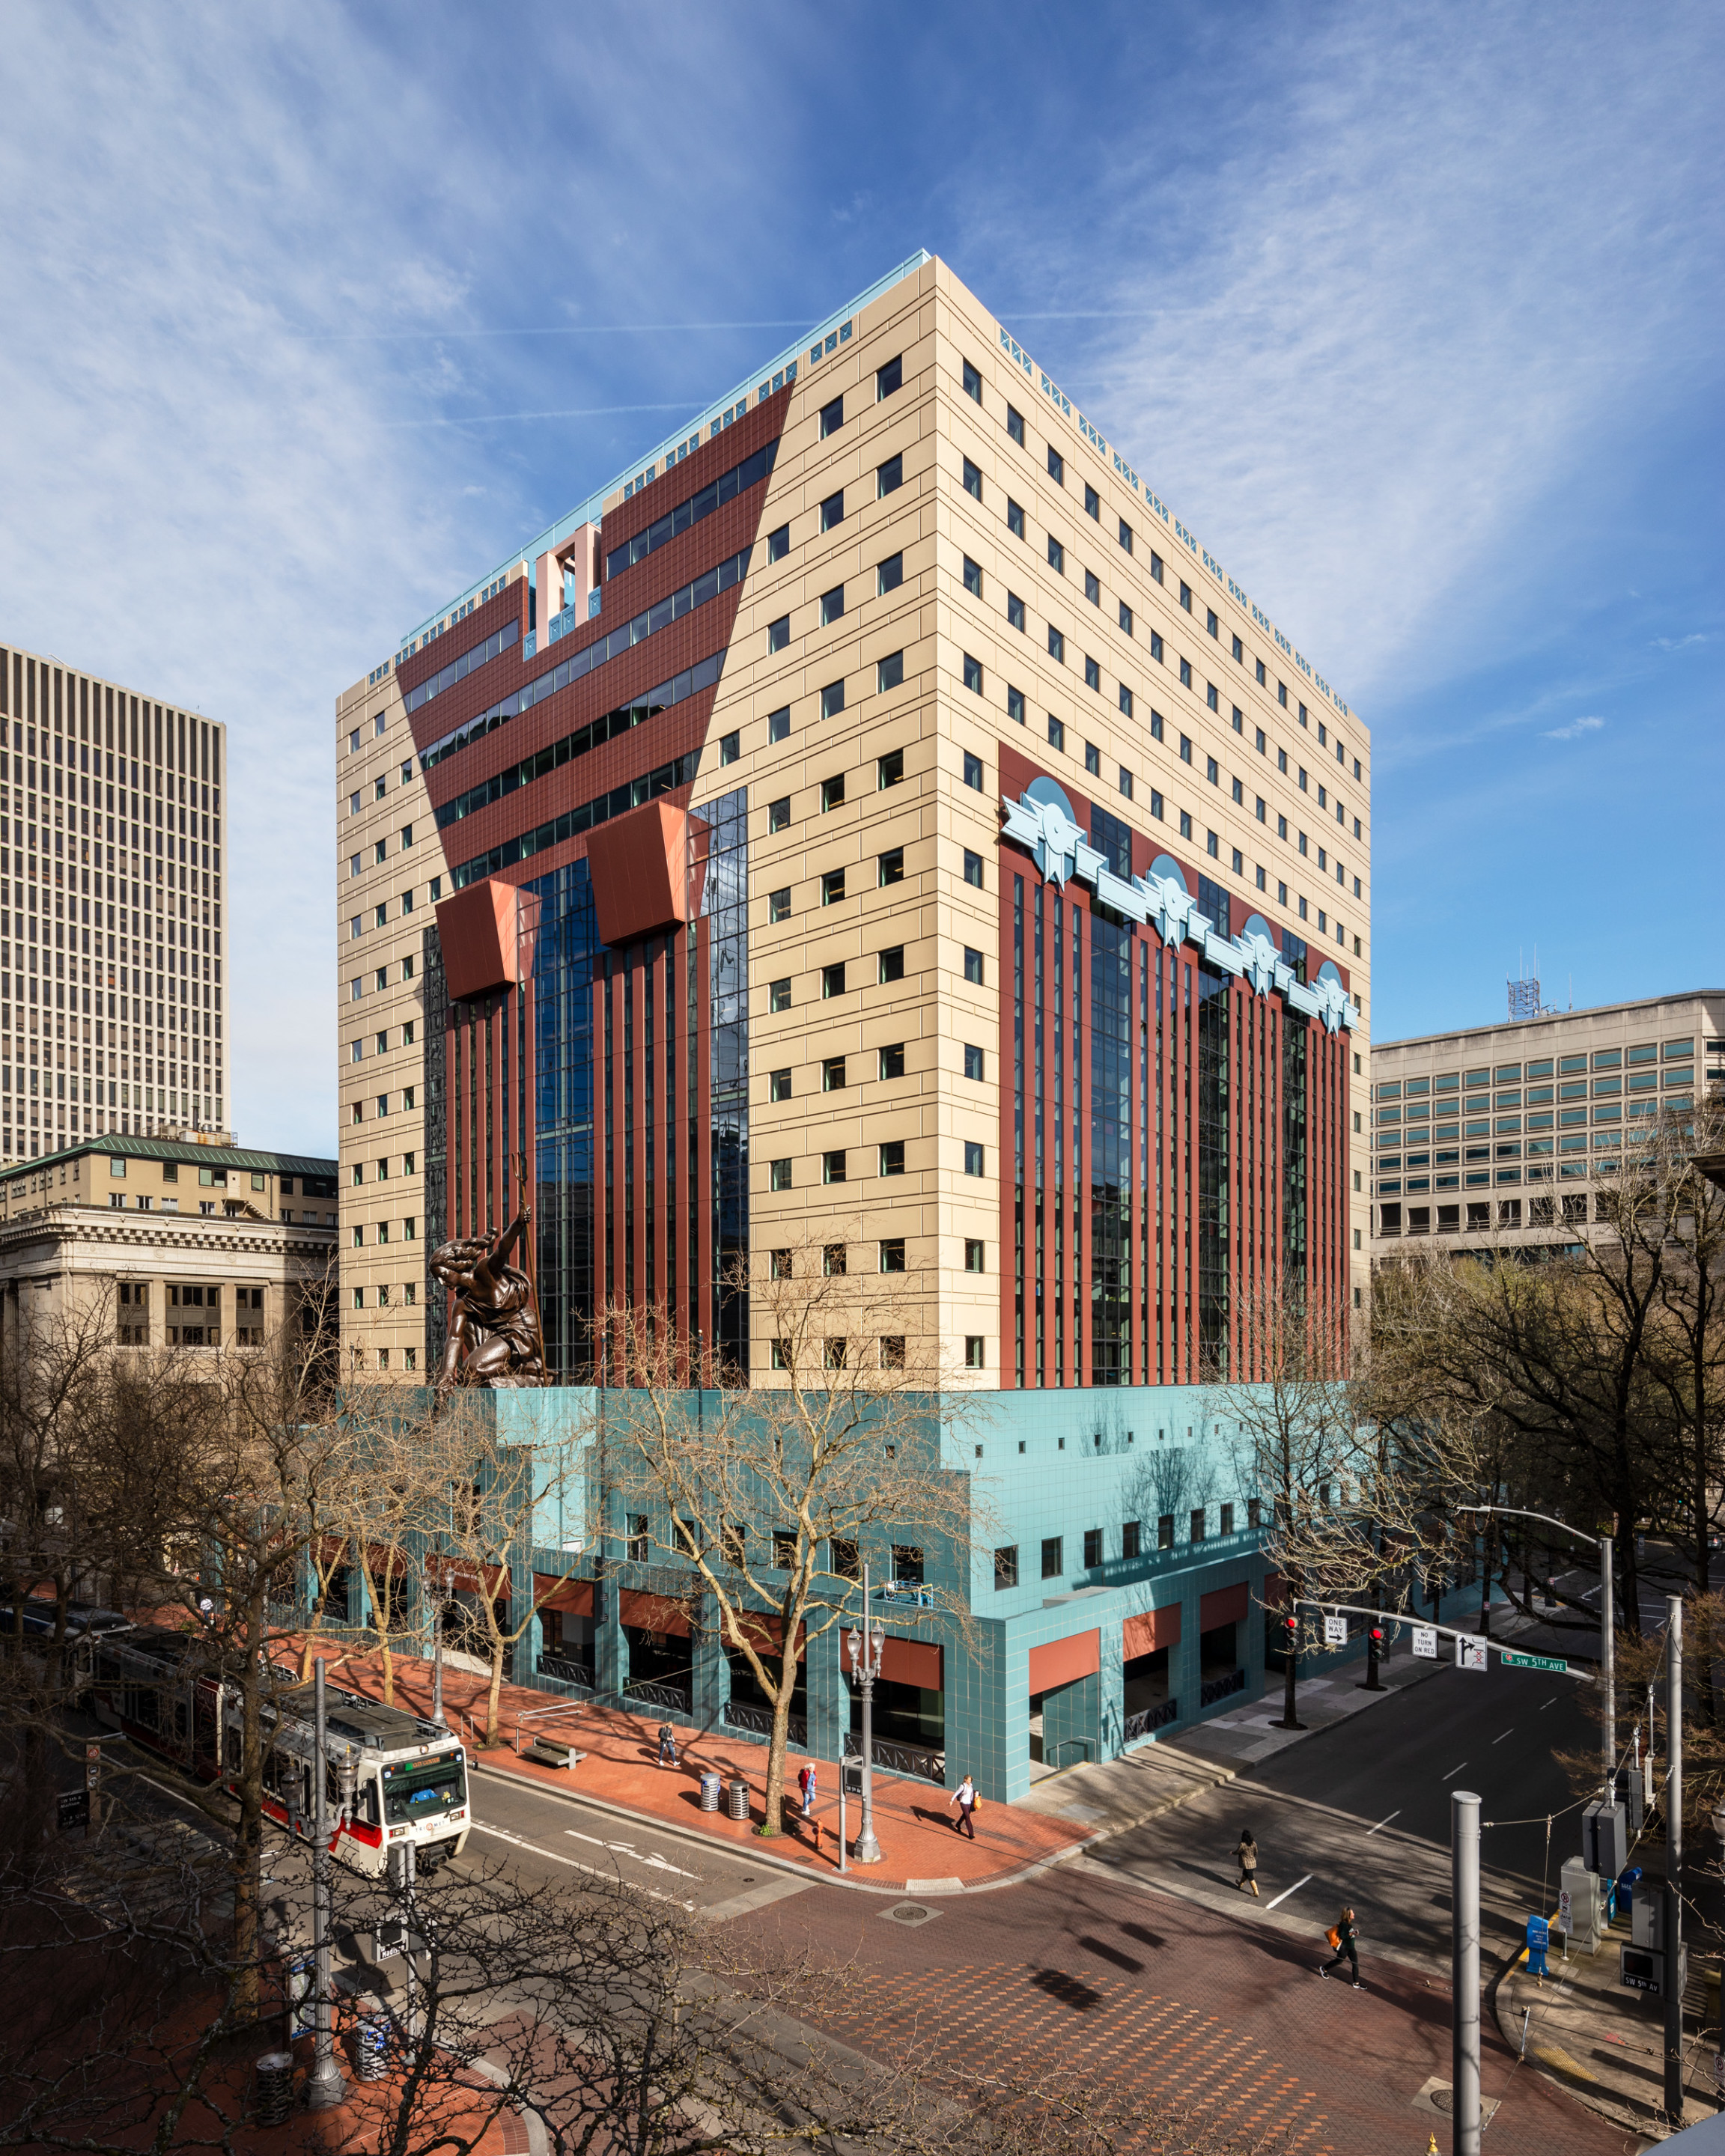 Contextual image of the Portland Building within Downtown Portland